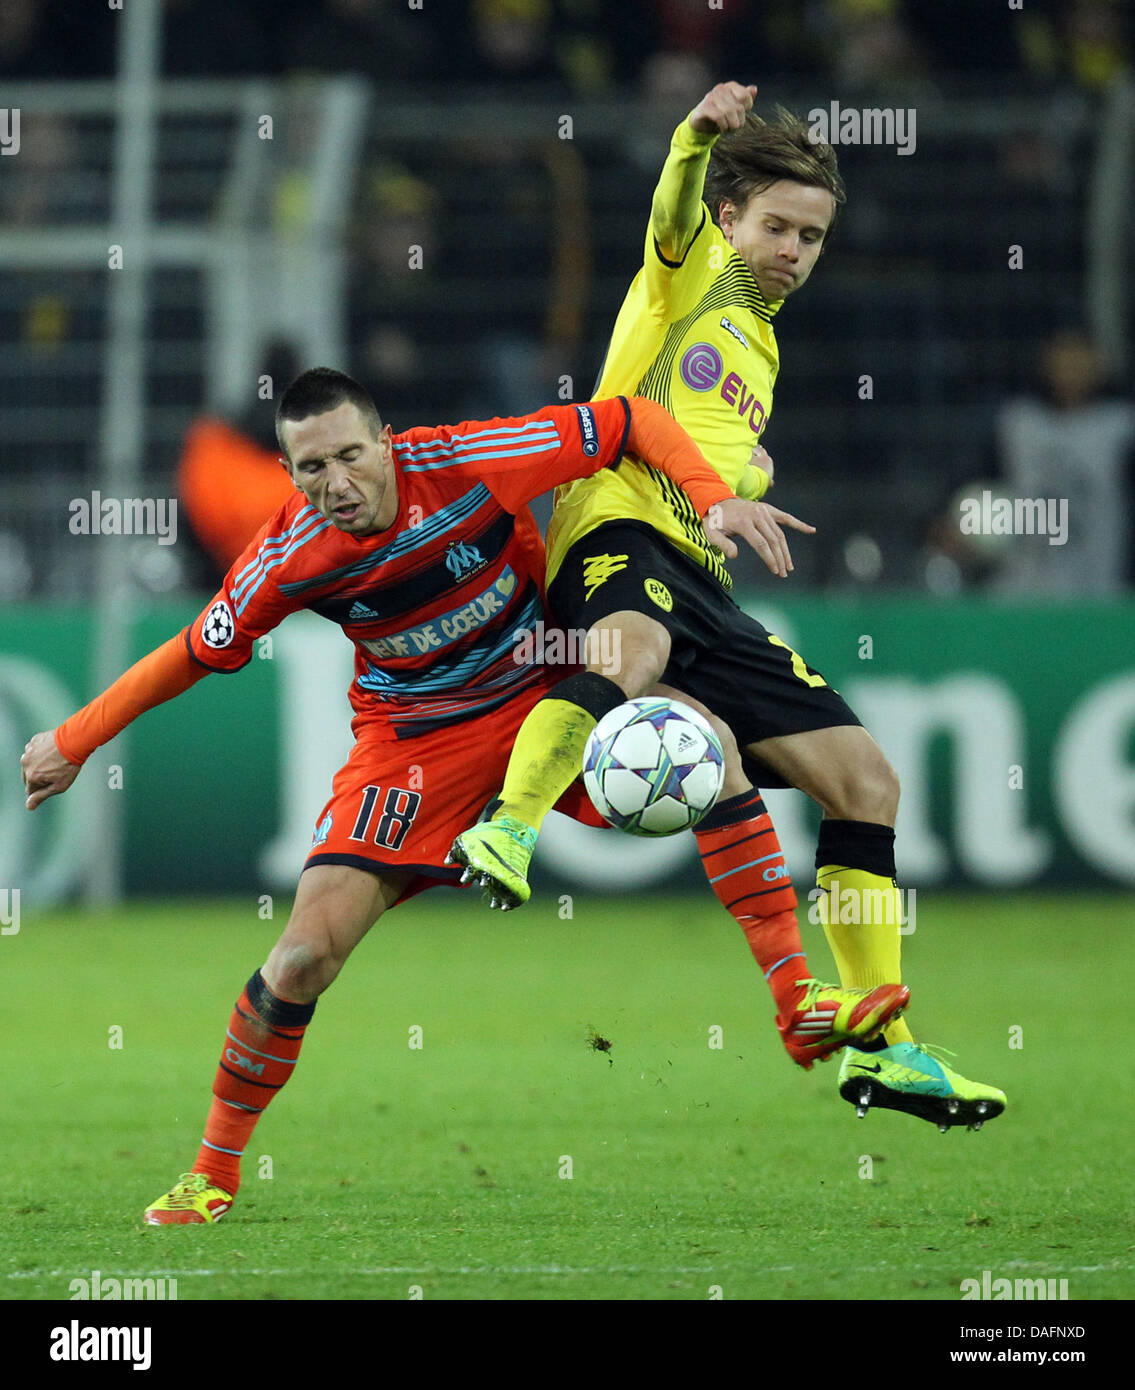 Dortmund's Chris Loewe (r) and Marseille's Morgan Amalfitano (l) vie for the ball during the Champions League group F soccer match between Borussia Dortmund and Olympique Marseille at the BVB Arena in Dortmund, Germany 06 December 2011. Photo: Friso Gentsch dpa/lnw Stock Photo